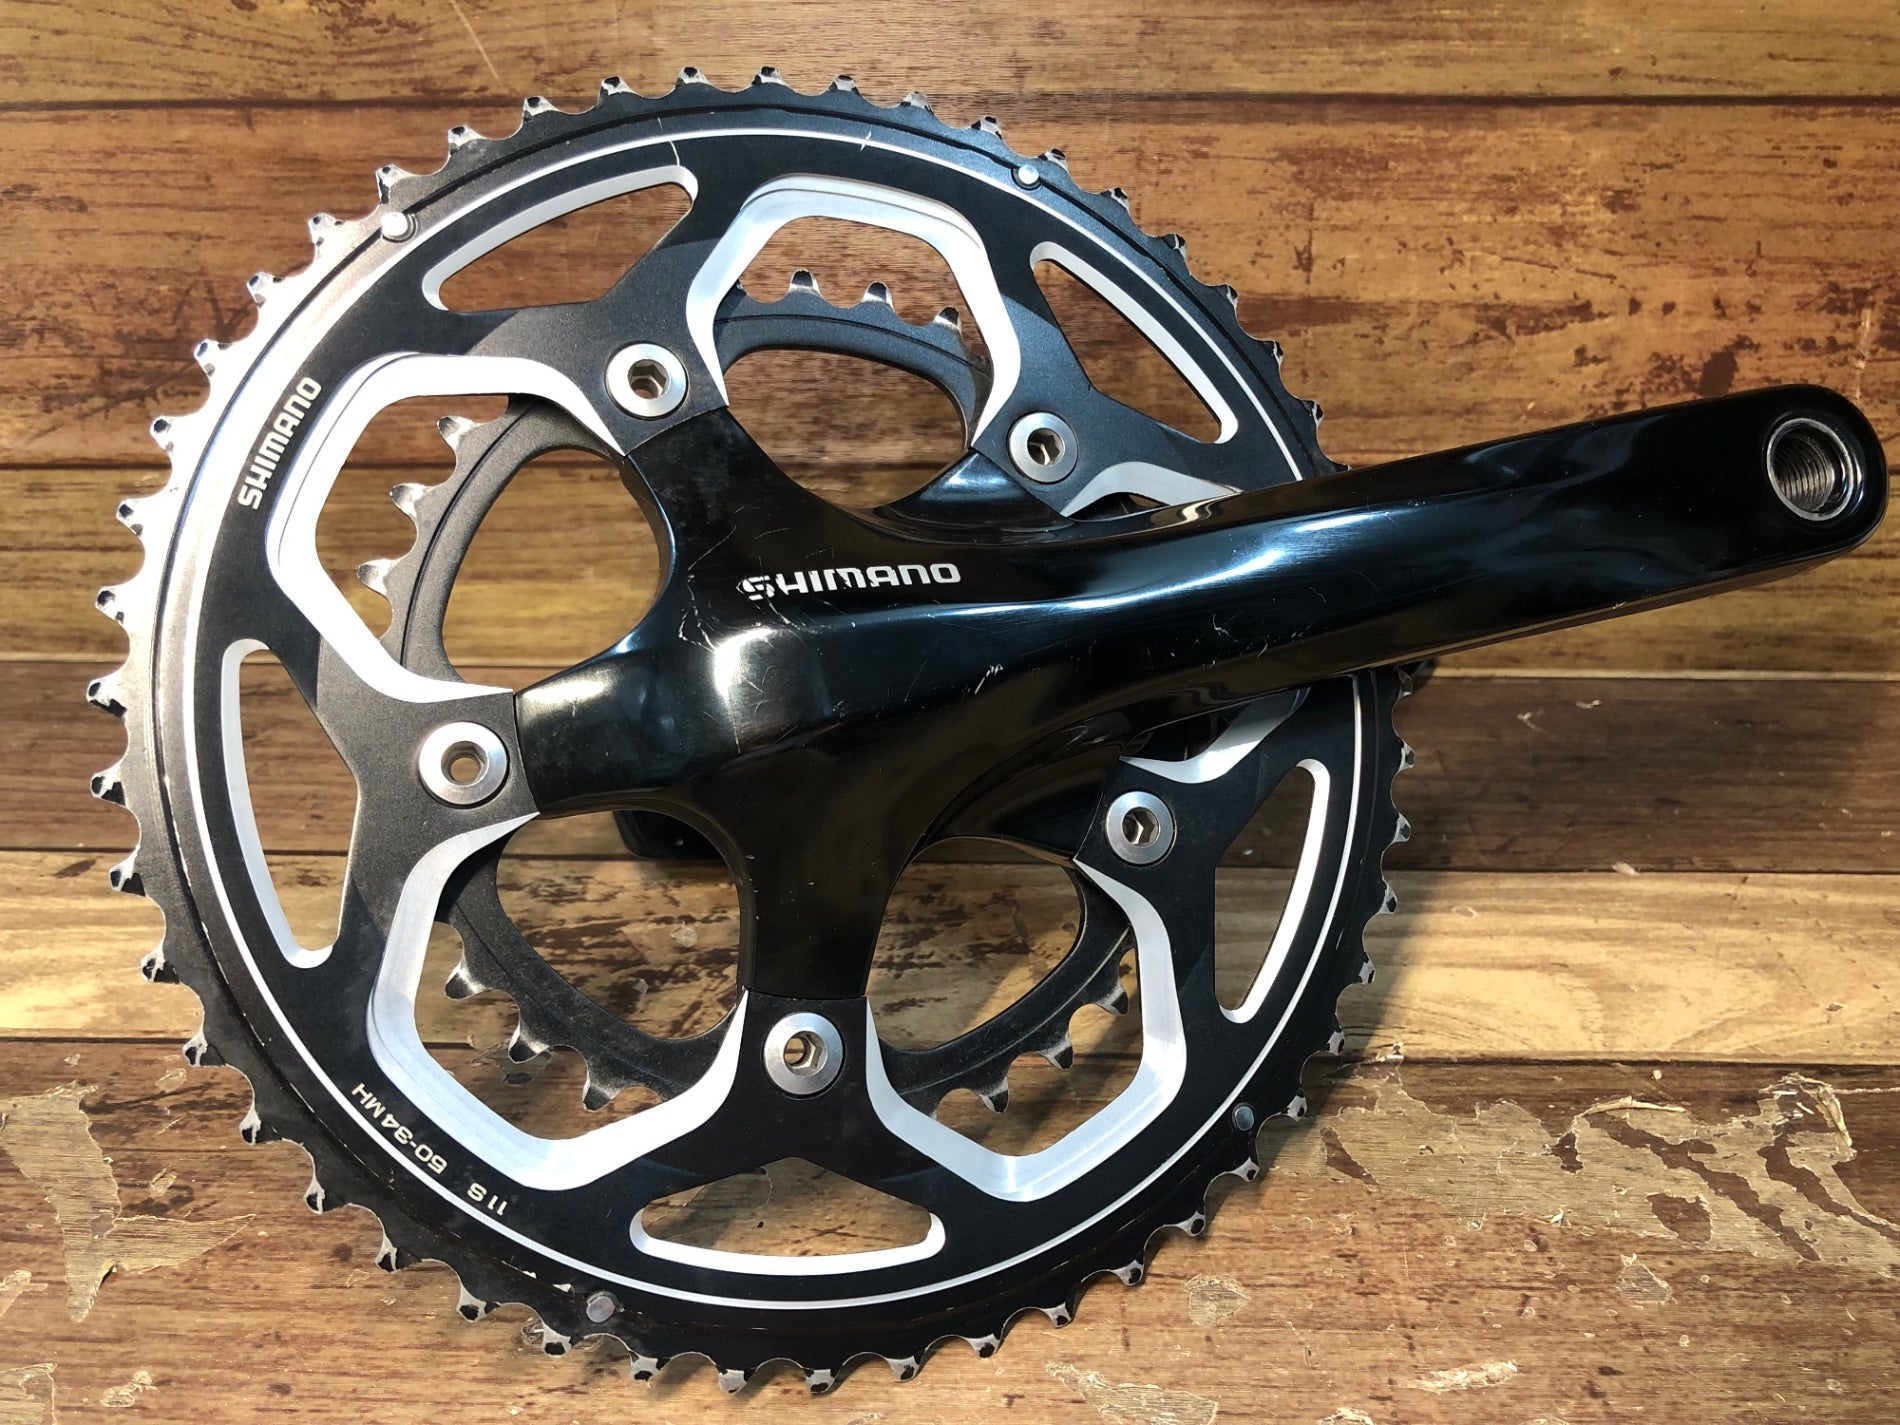 HK387 シマノ FC-RS500 クランクセット 50-34T 170mm 11S – BICI AMORE 